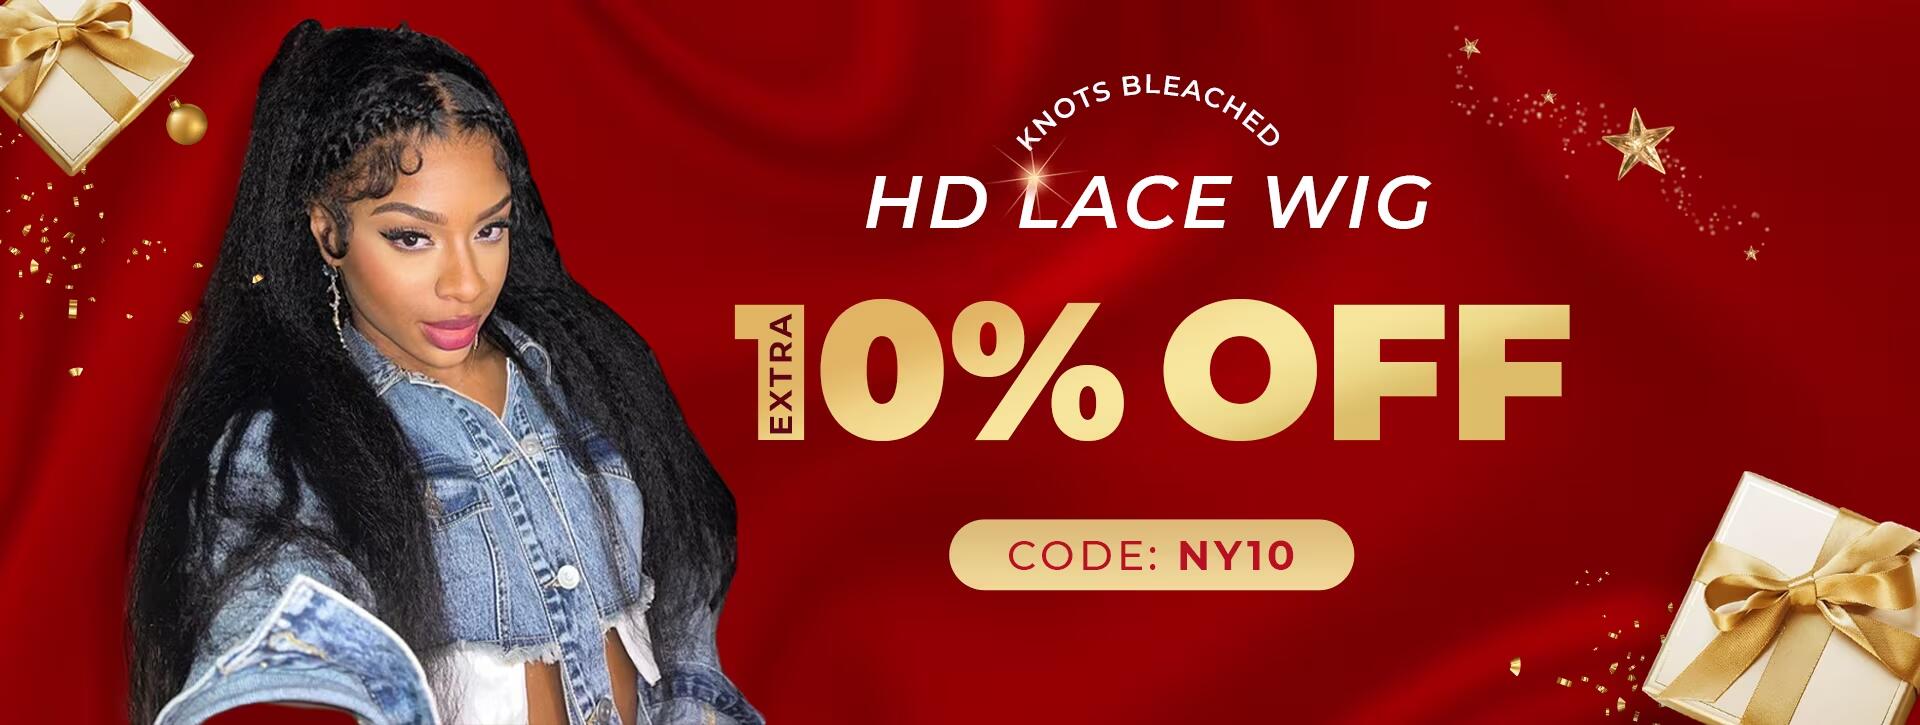 Isee HD Lace Wig extra 10% off